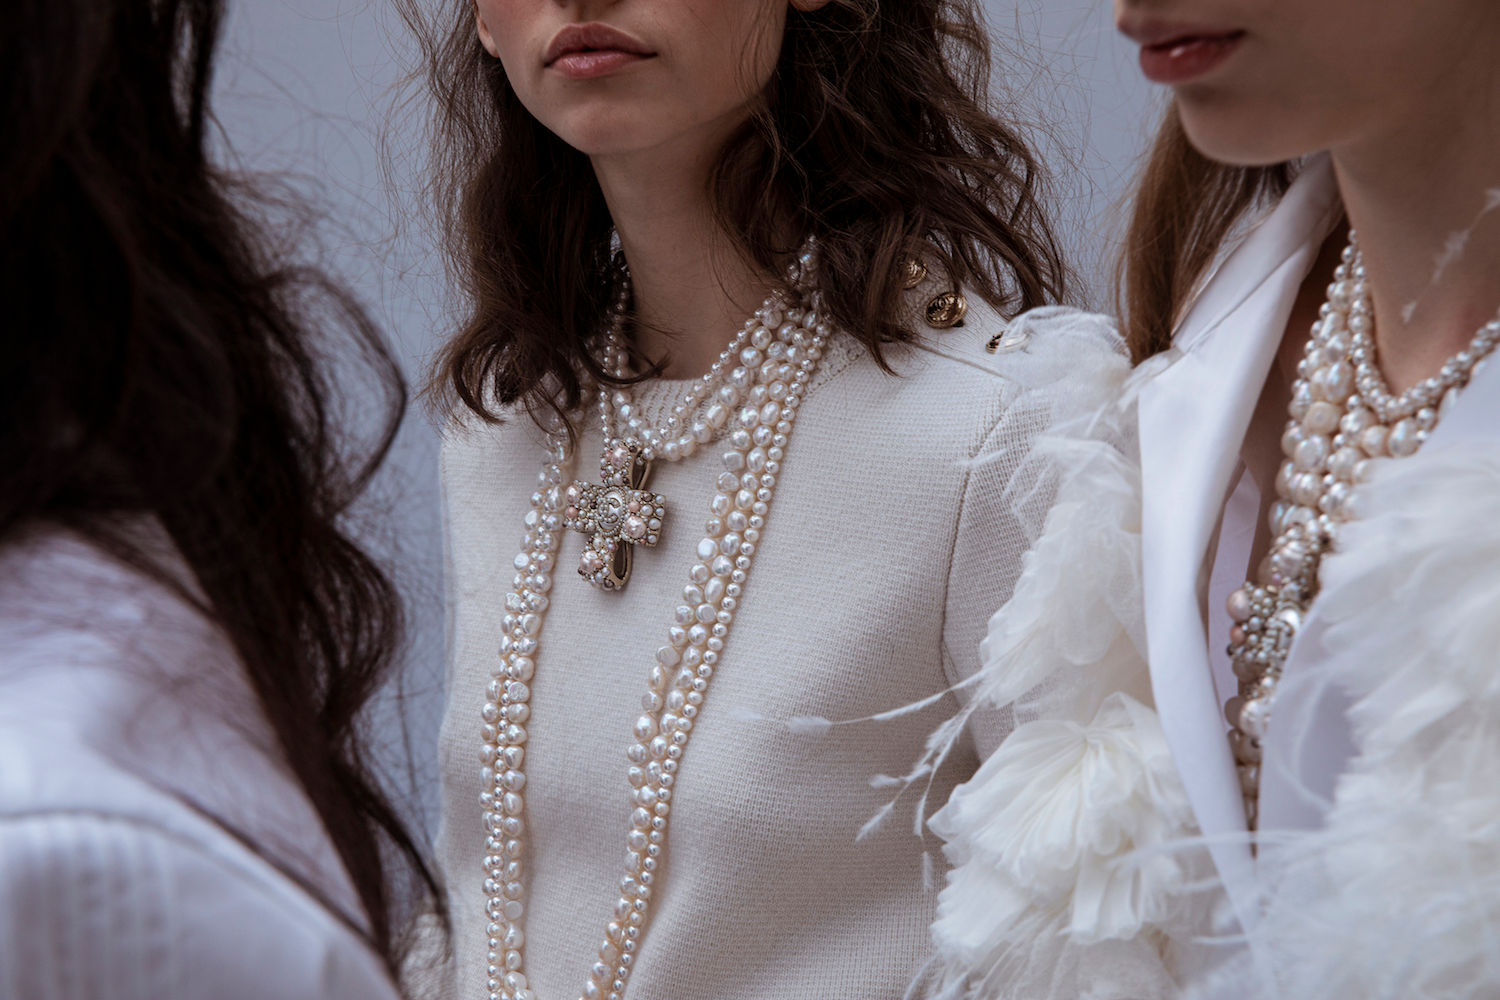 Chanel FW2020 Brings Back Costume Jewellery and Statement Pieces